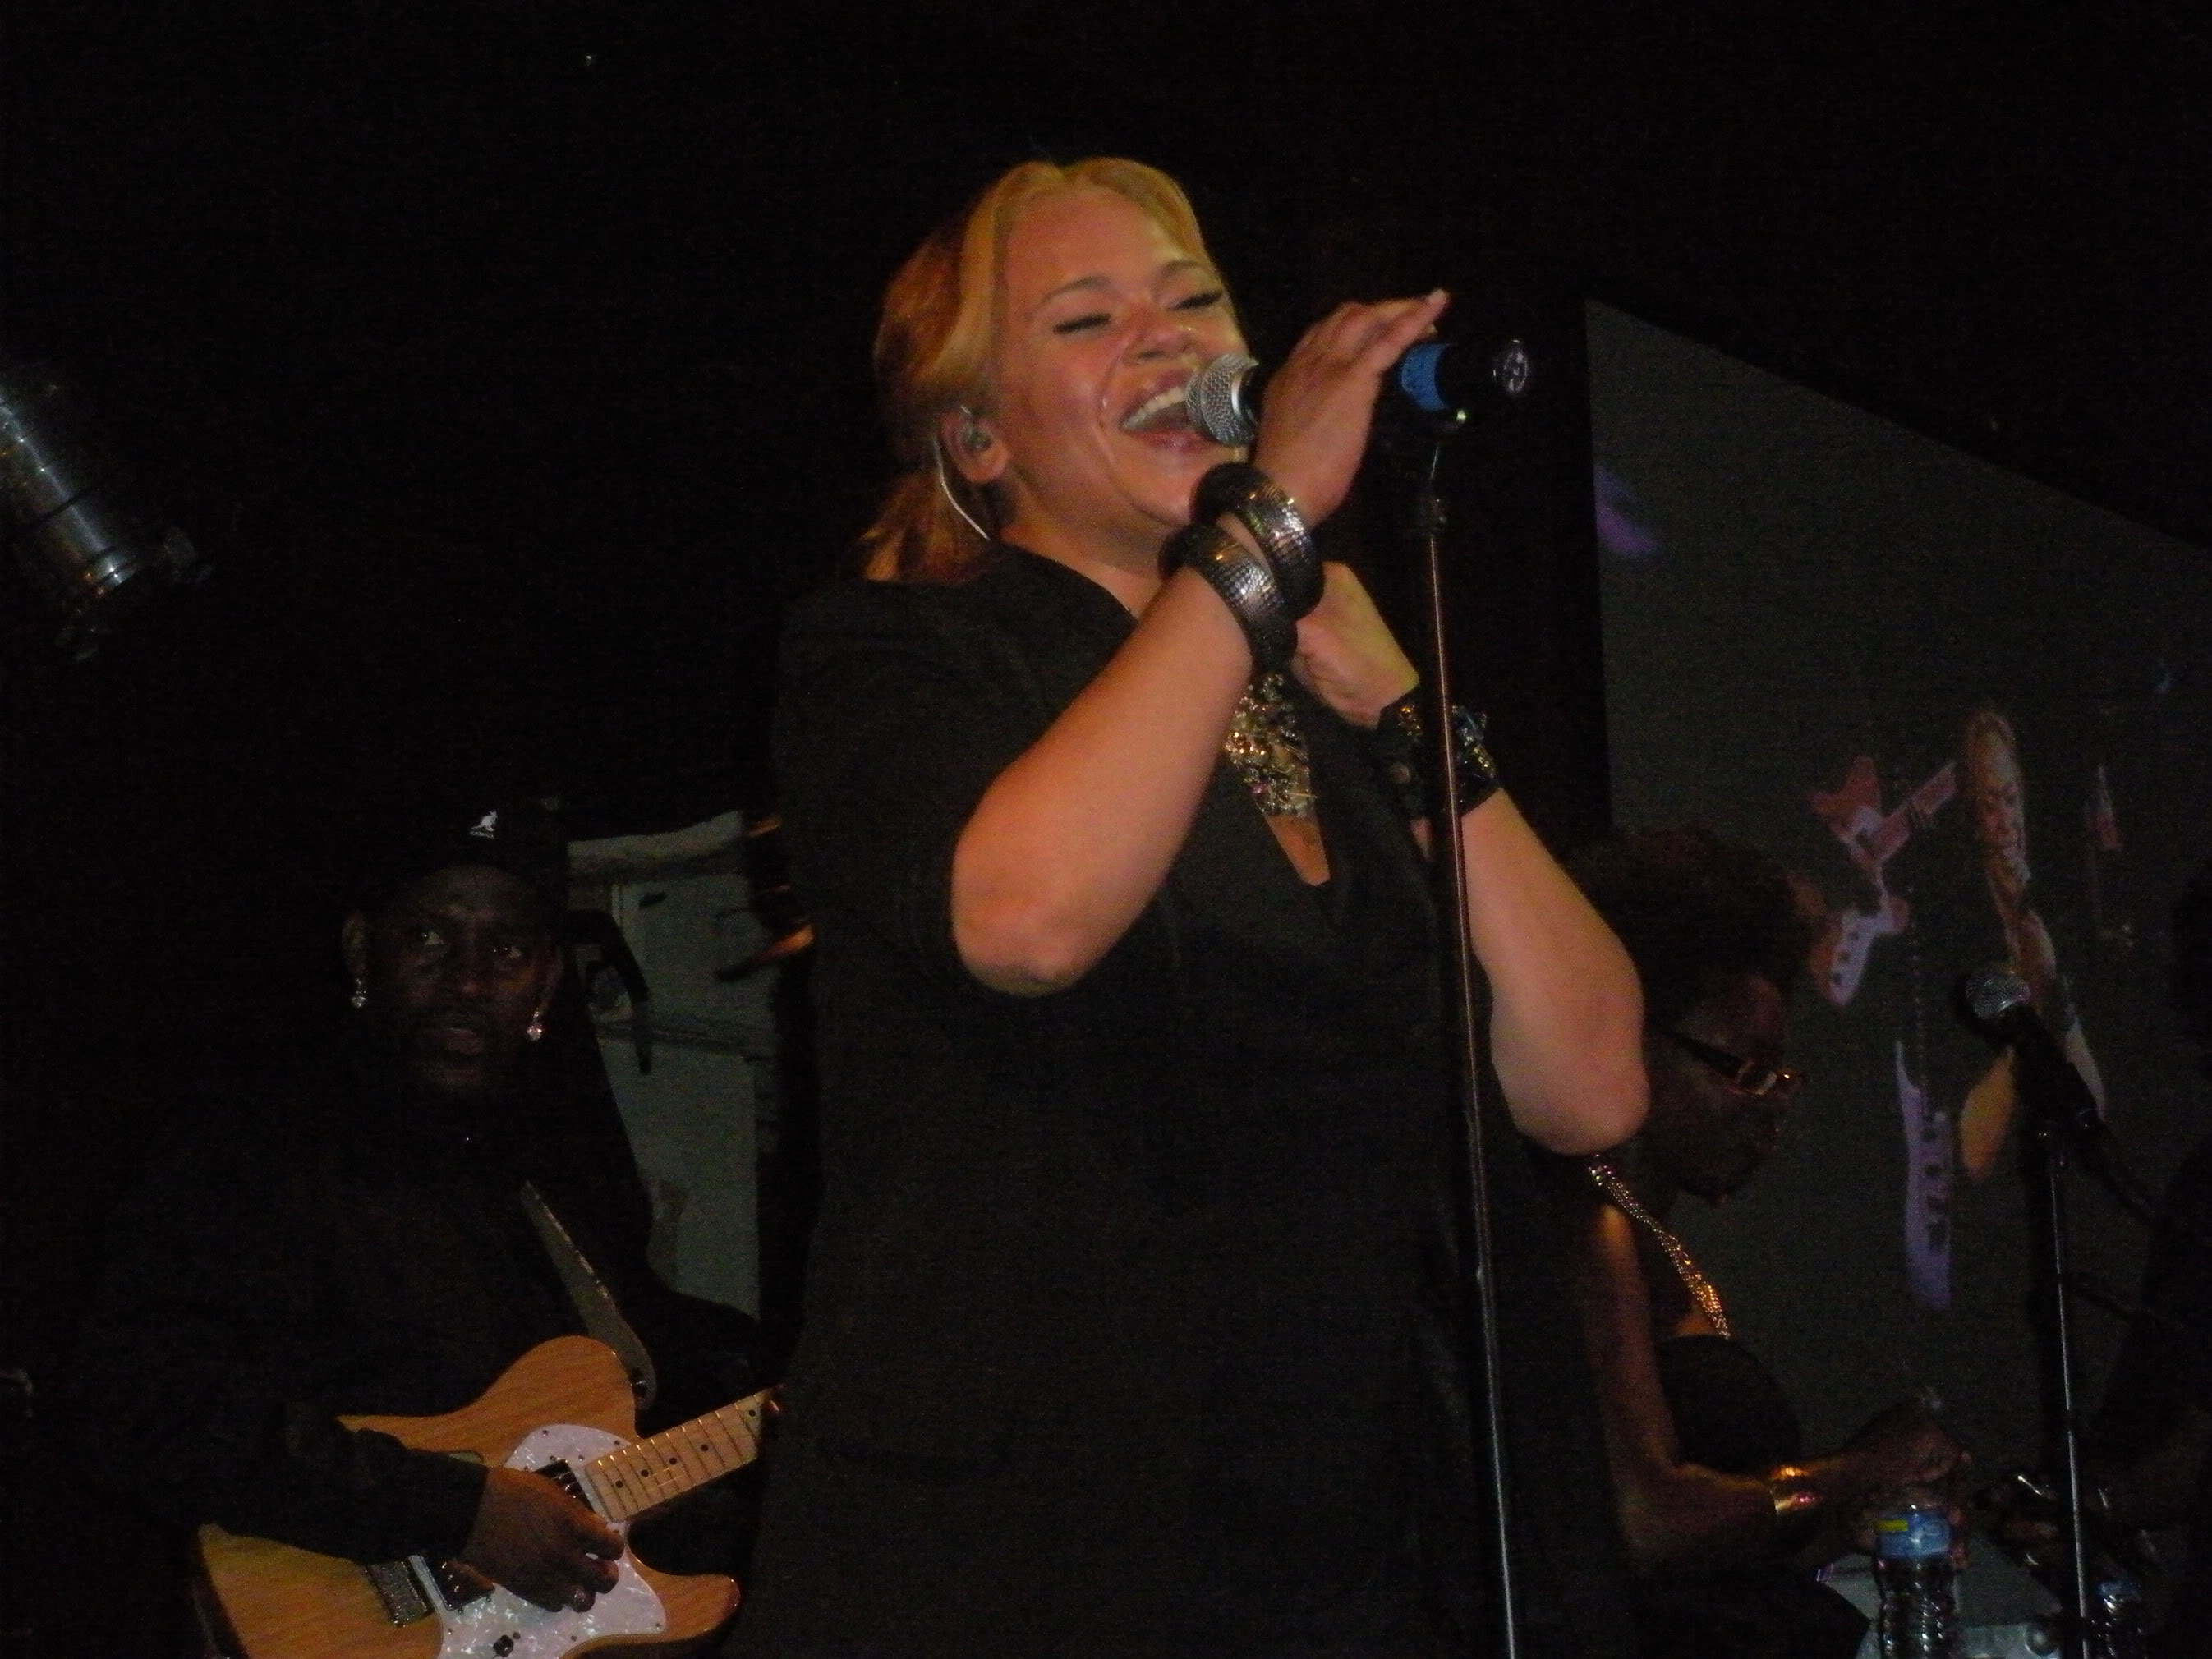 Faith Evans Live Concert Footage at B.B. Kings 10/5/10 (Part 3 of 3)